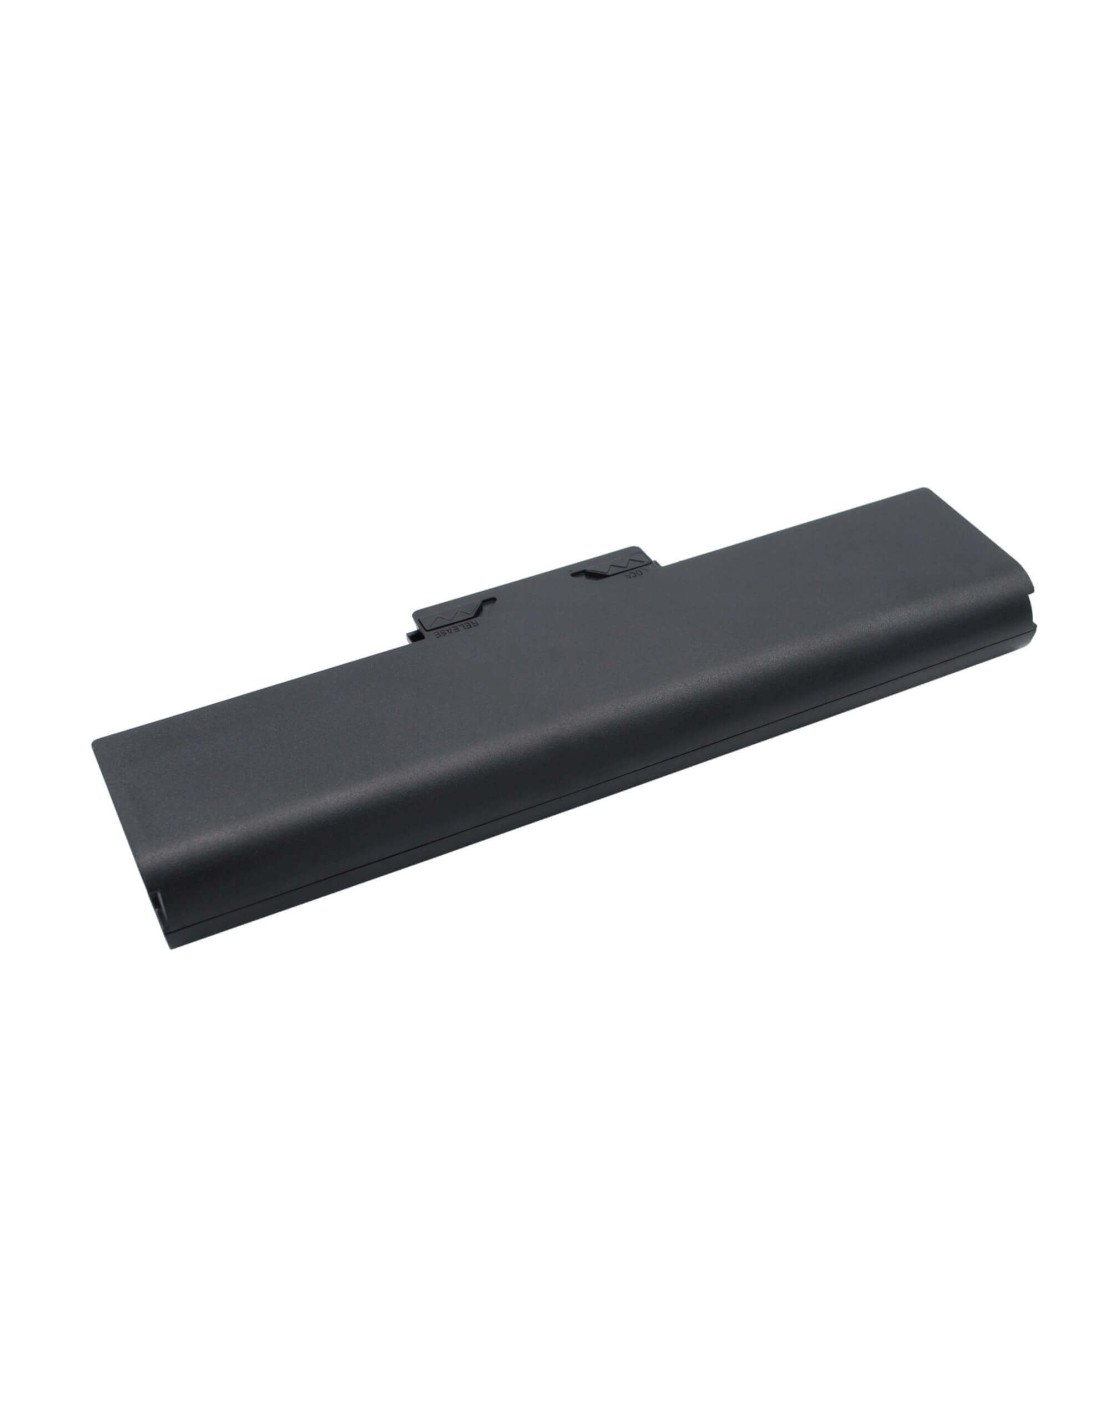 Black Battery for Sony Vaio Vgn-aw41jf, Vaio Vgn-aw41mf, Vaio Vgn-aw41xh 11.1V, 4400mAh - 48.84Wh